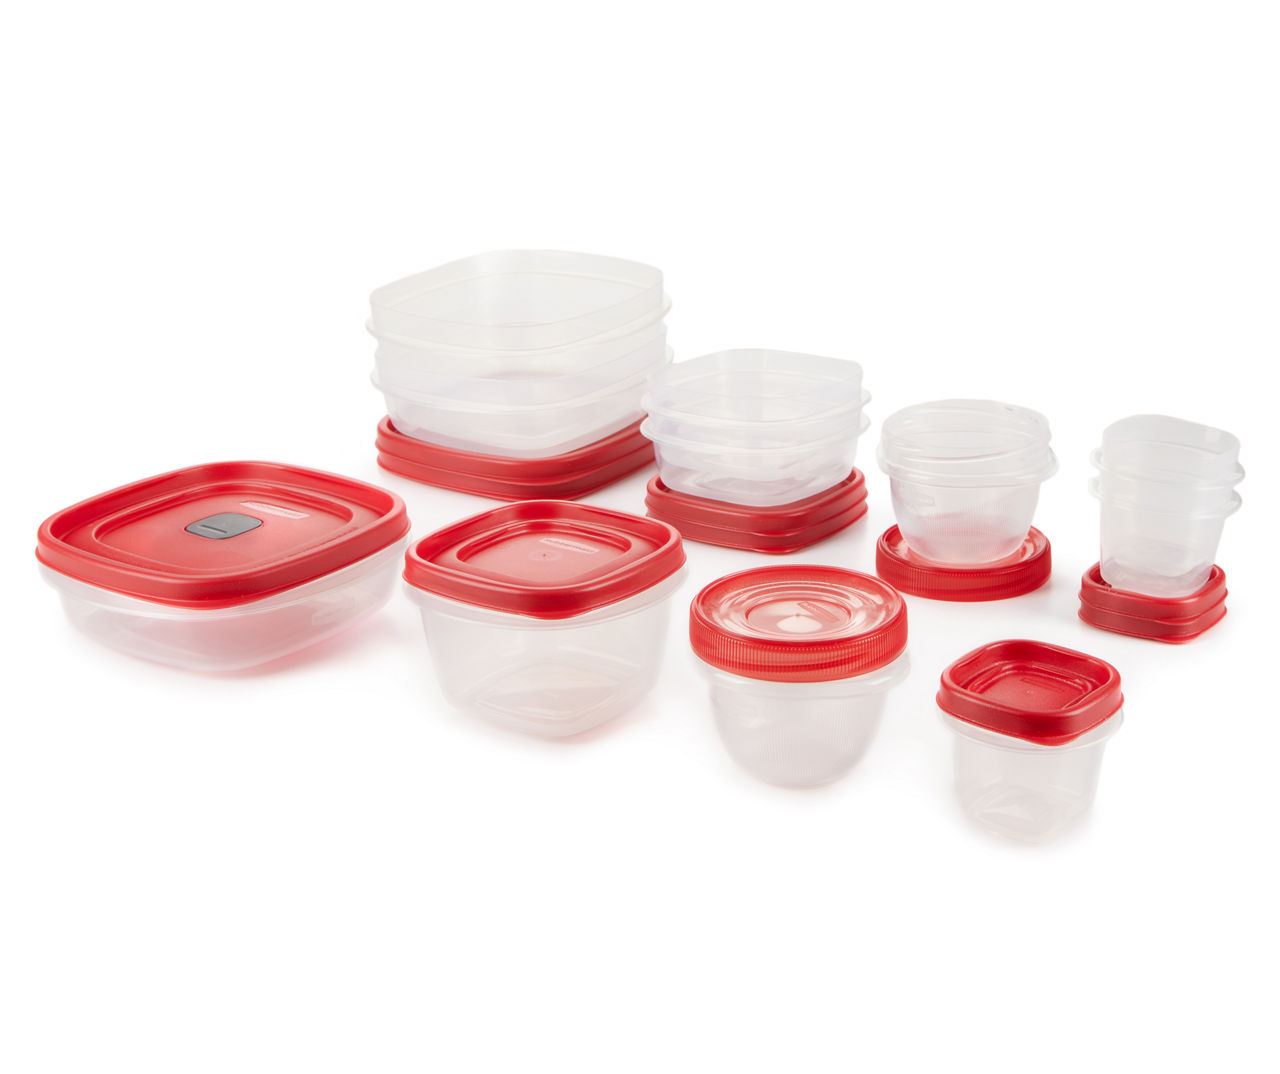 Rubbermaid 40 Pc Easy Find Food Storage Containers